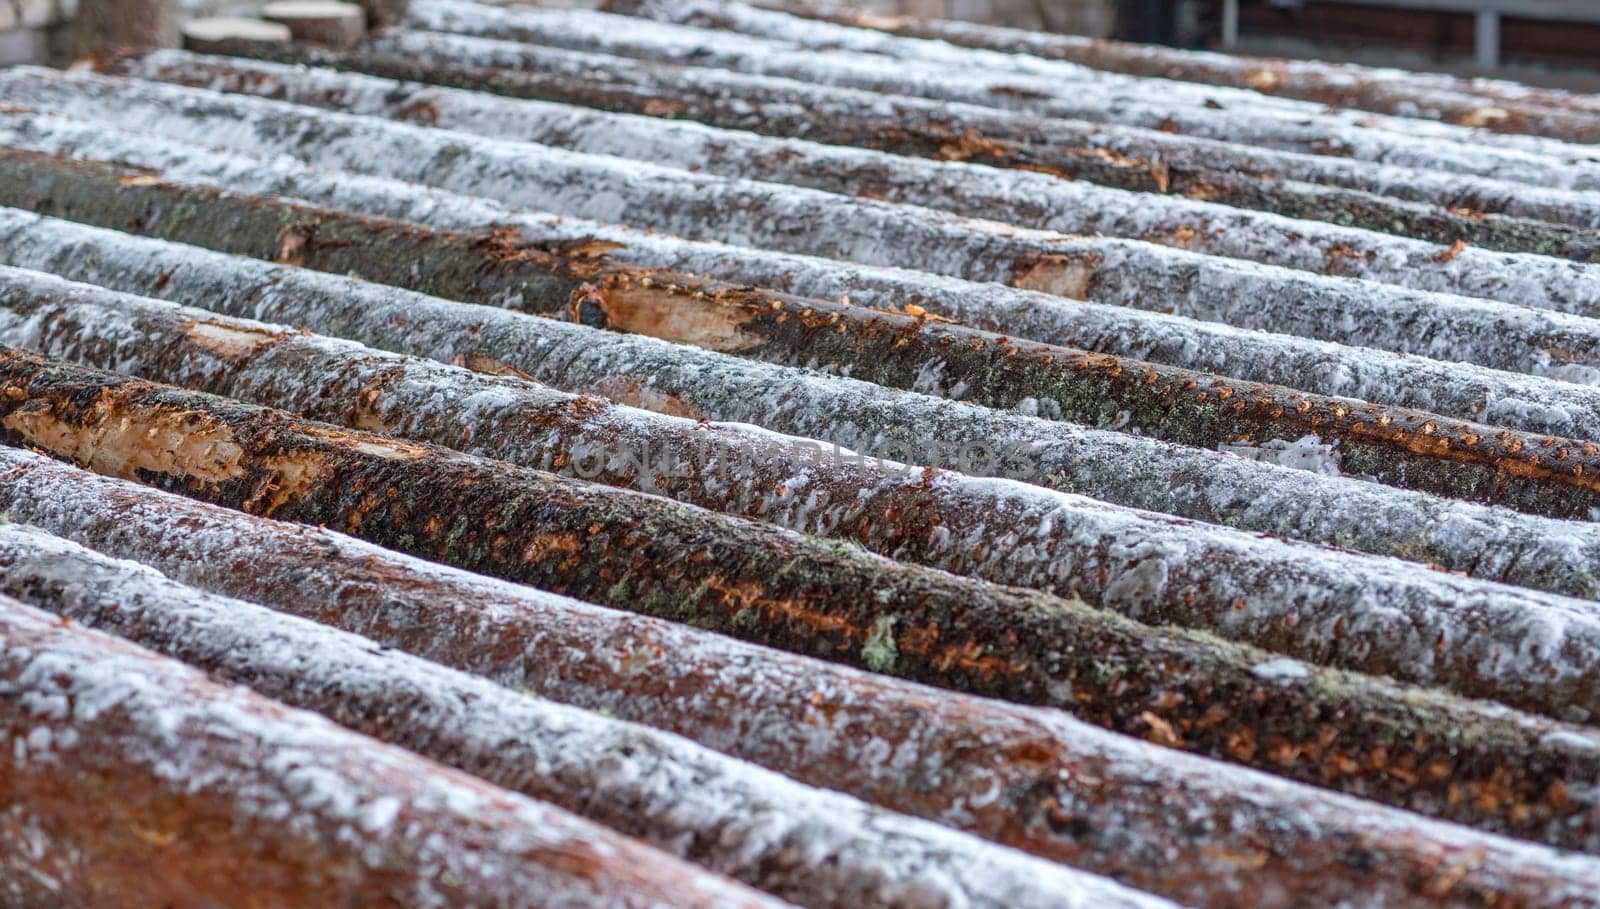 Image of snow-covered logs at sawmill by rivertime